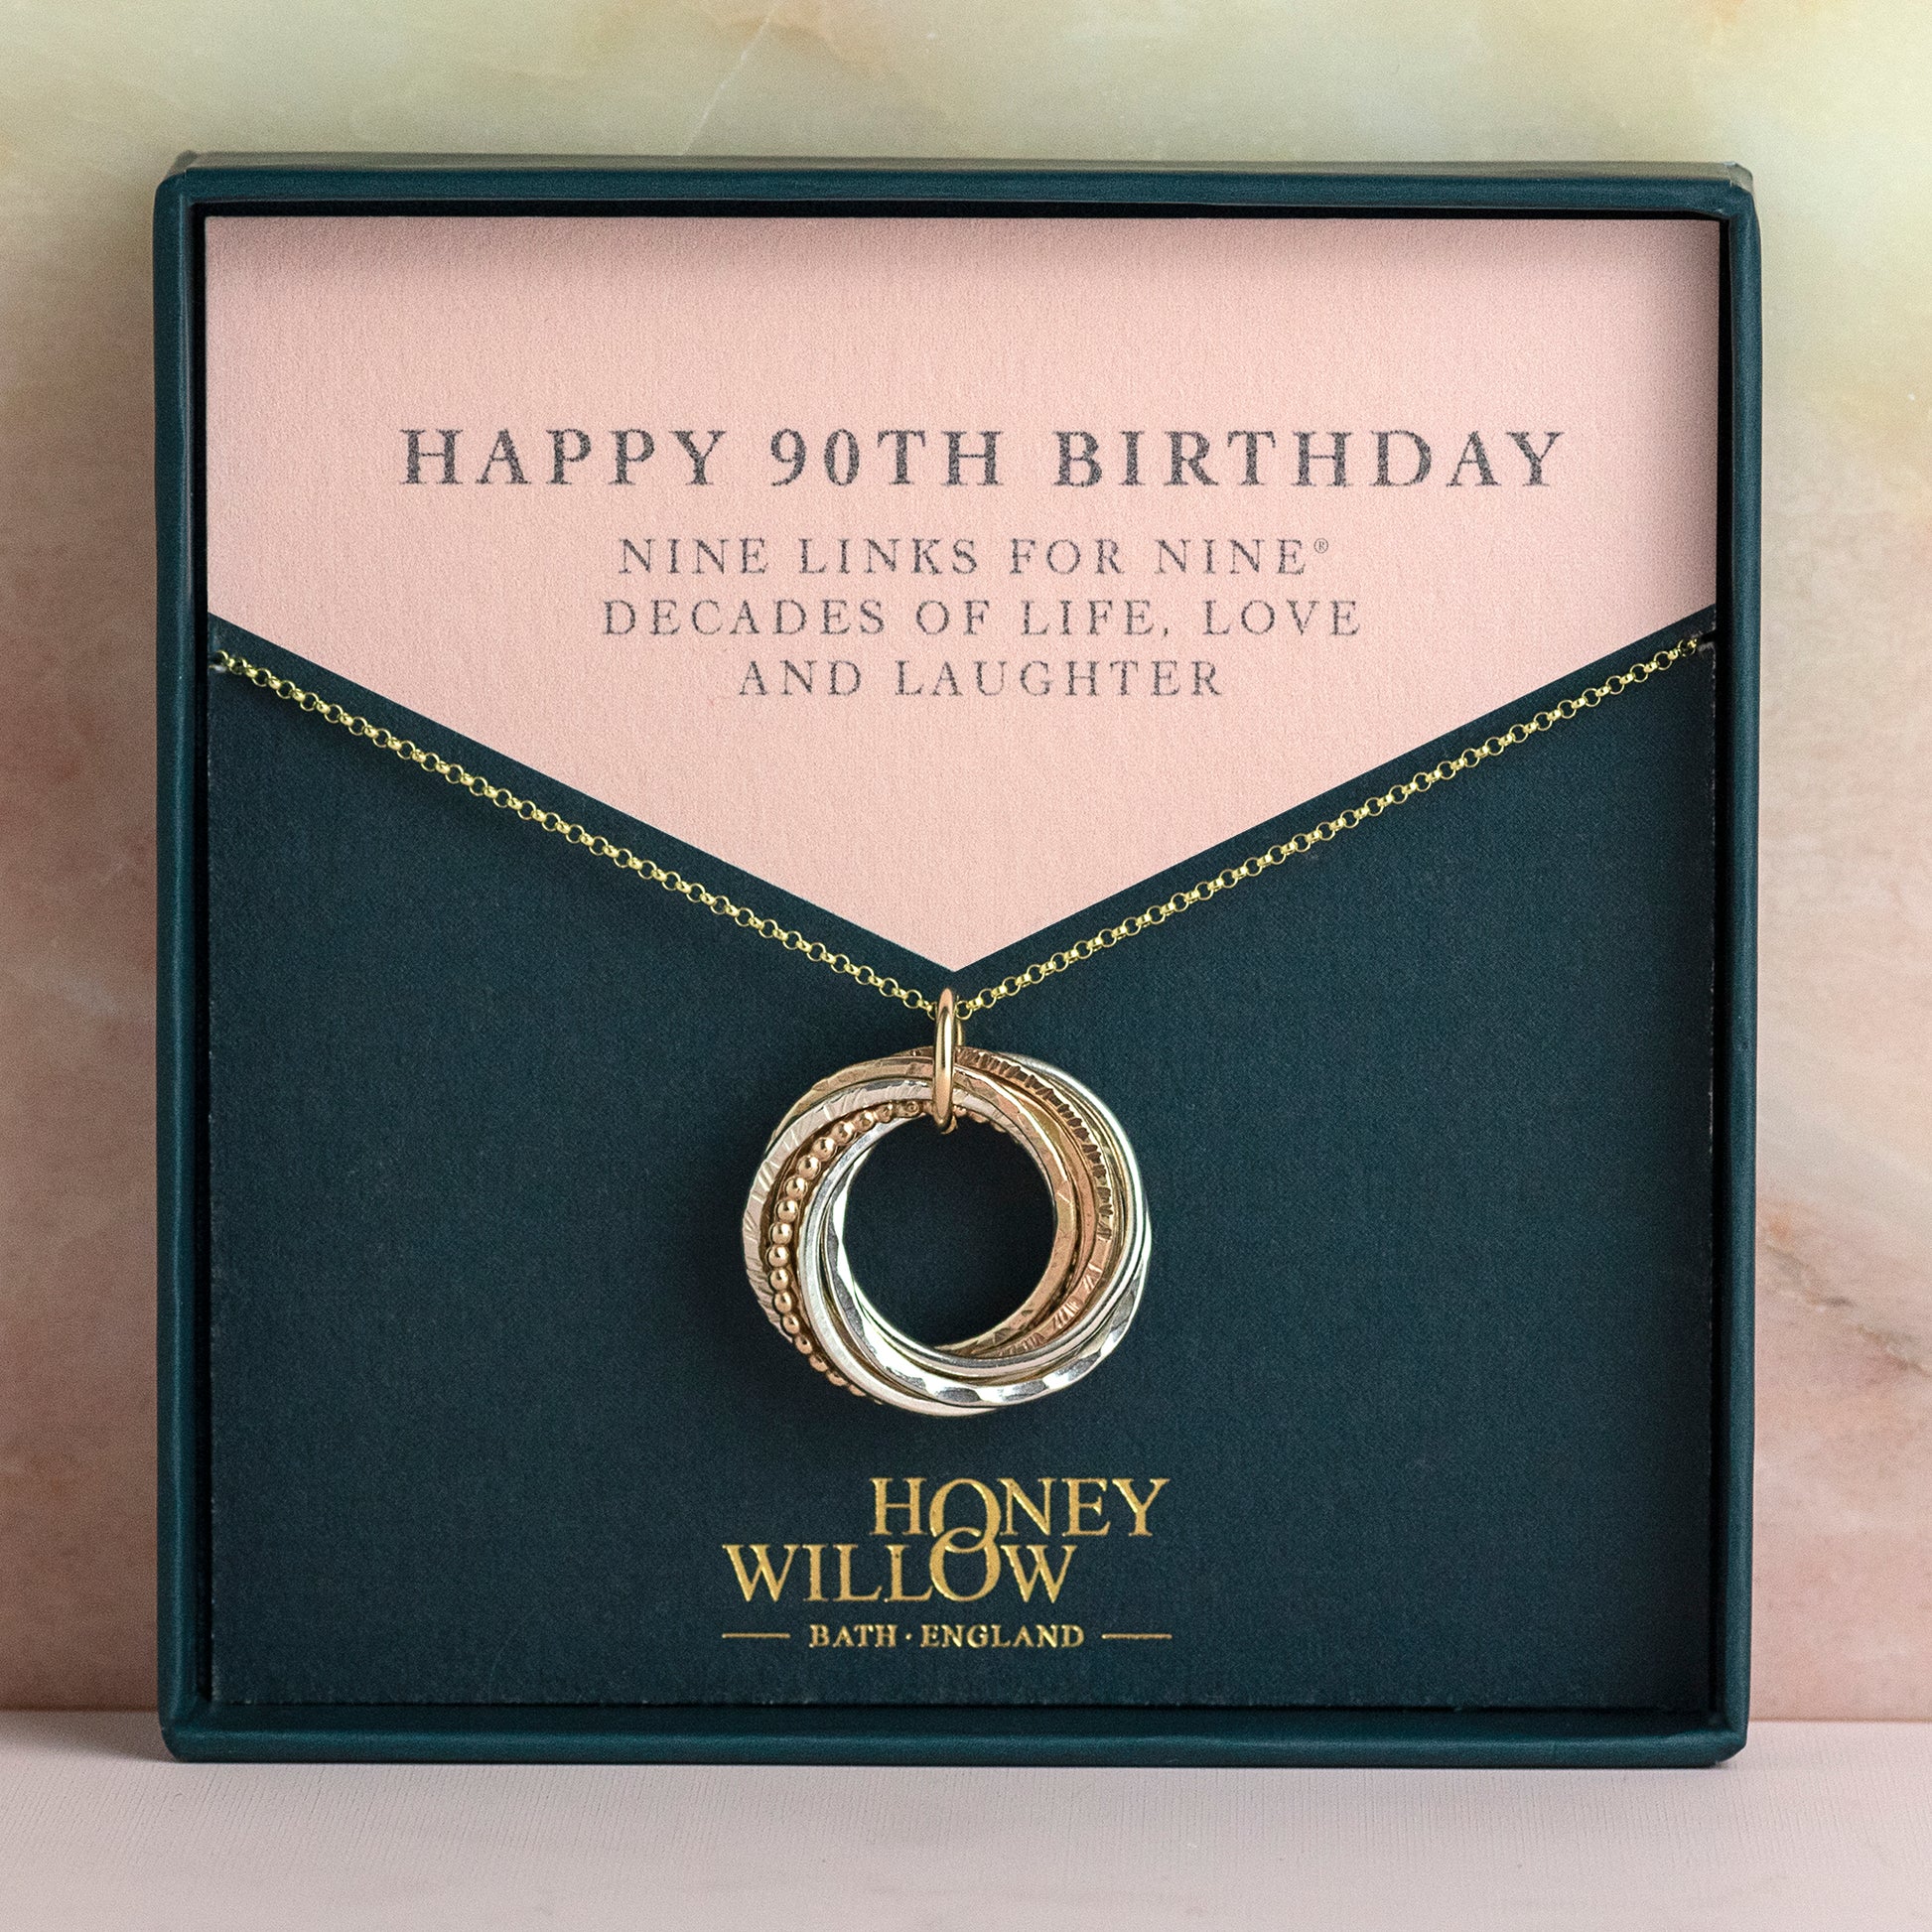 9kt Gold 90th Birthday Necklace - Recycled Gold, Rose Gold & Silver - The Original 9 Links for 9® Decades Necklace